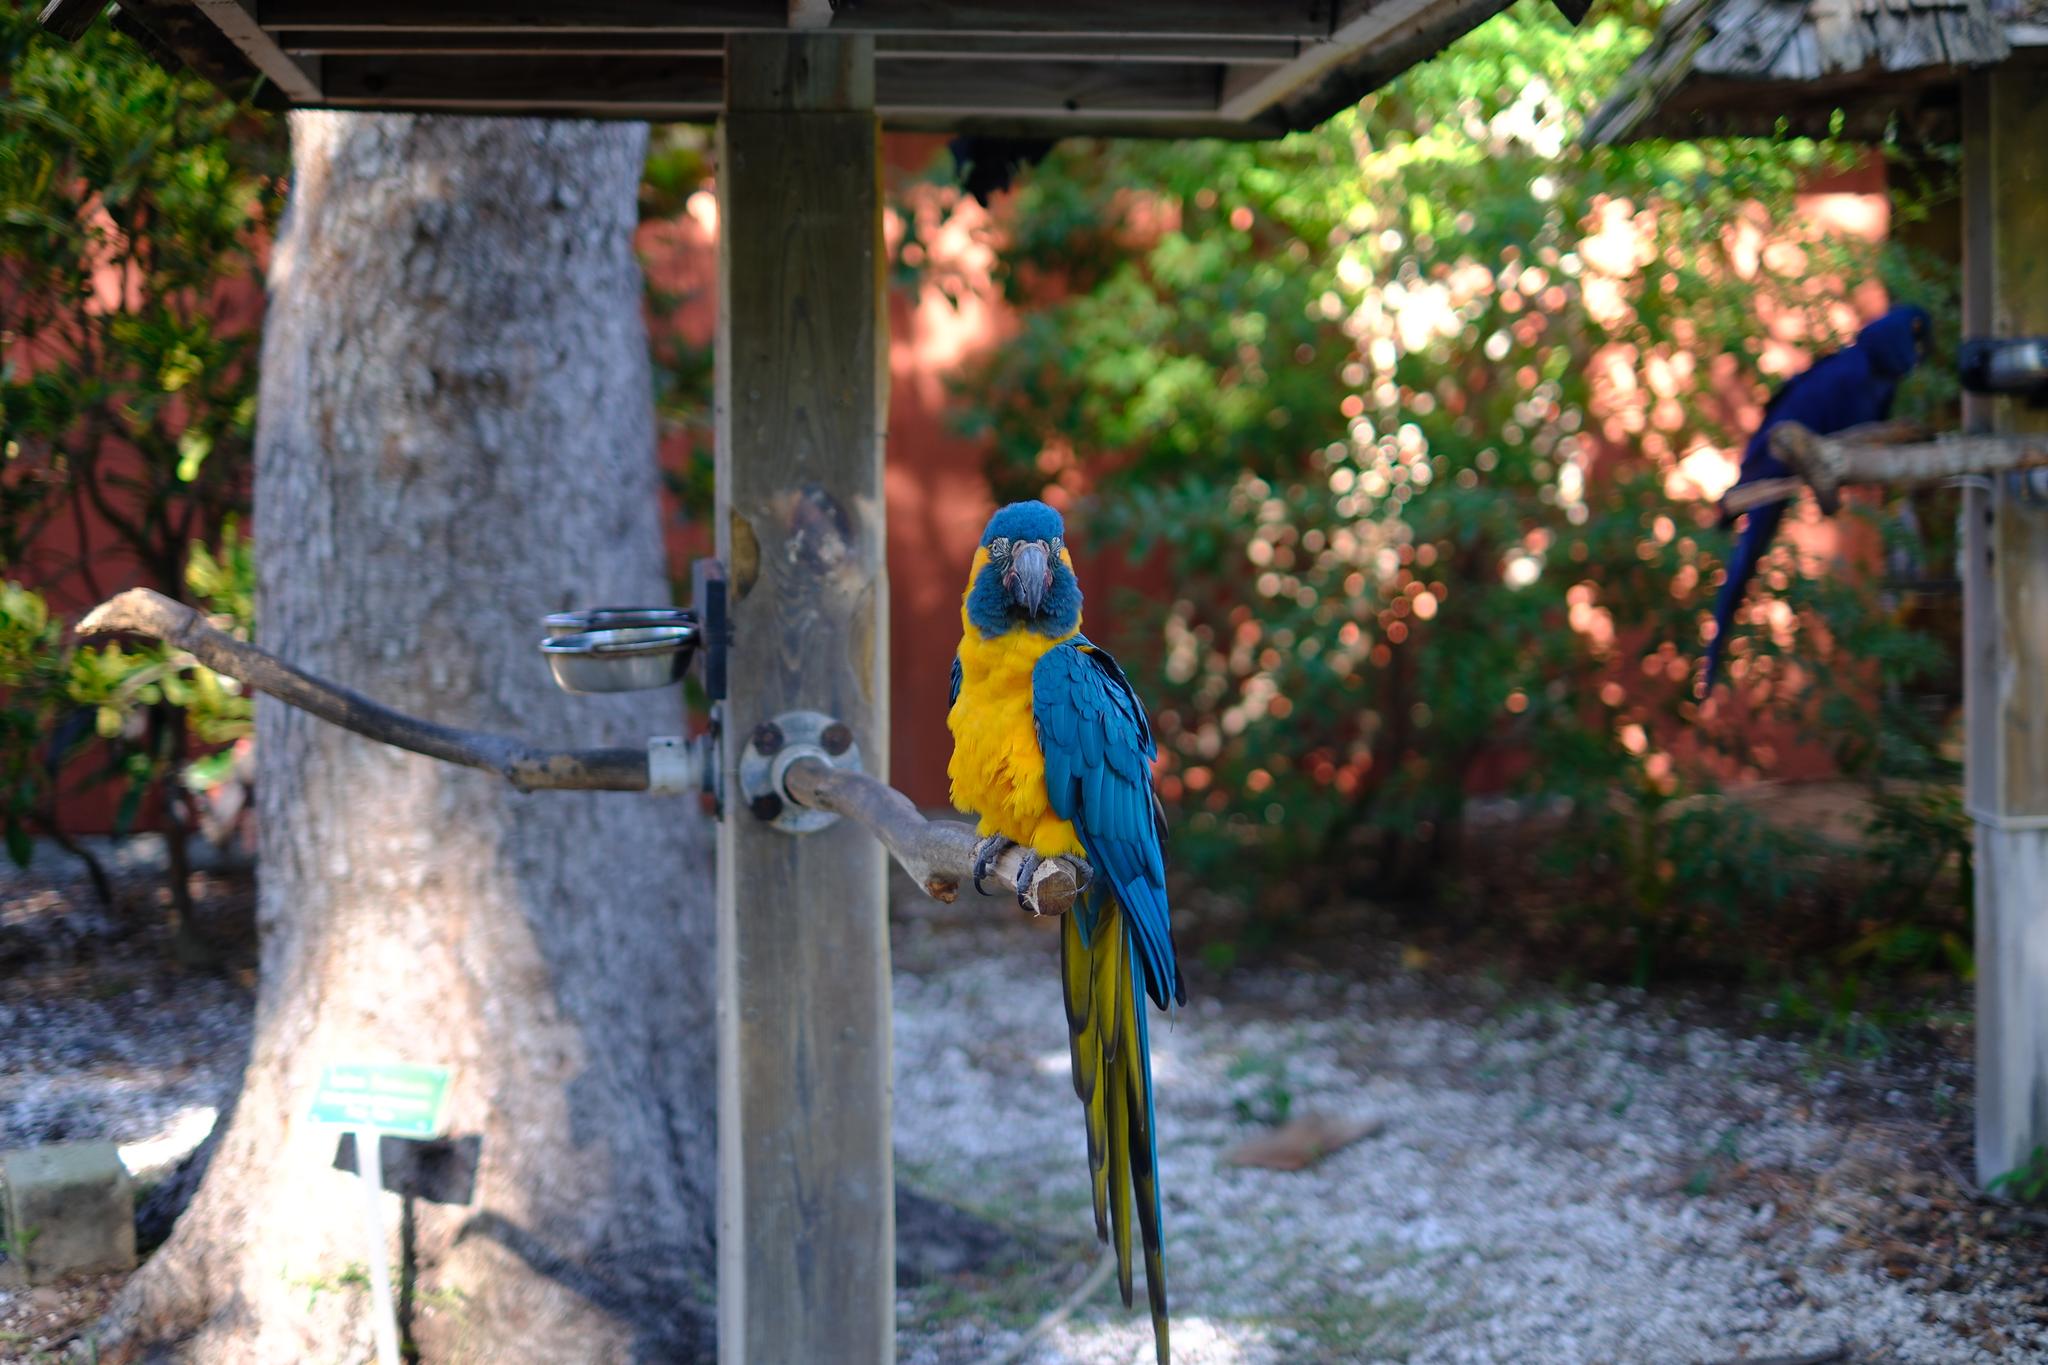 A vibrant blue and yellow parrot perched on a wooden structure in a garden setting, with another parrot visible in the background